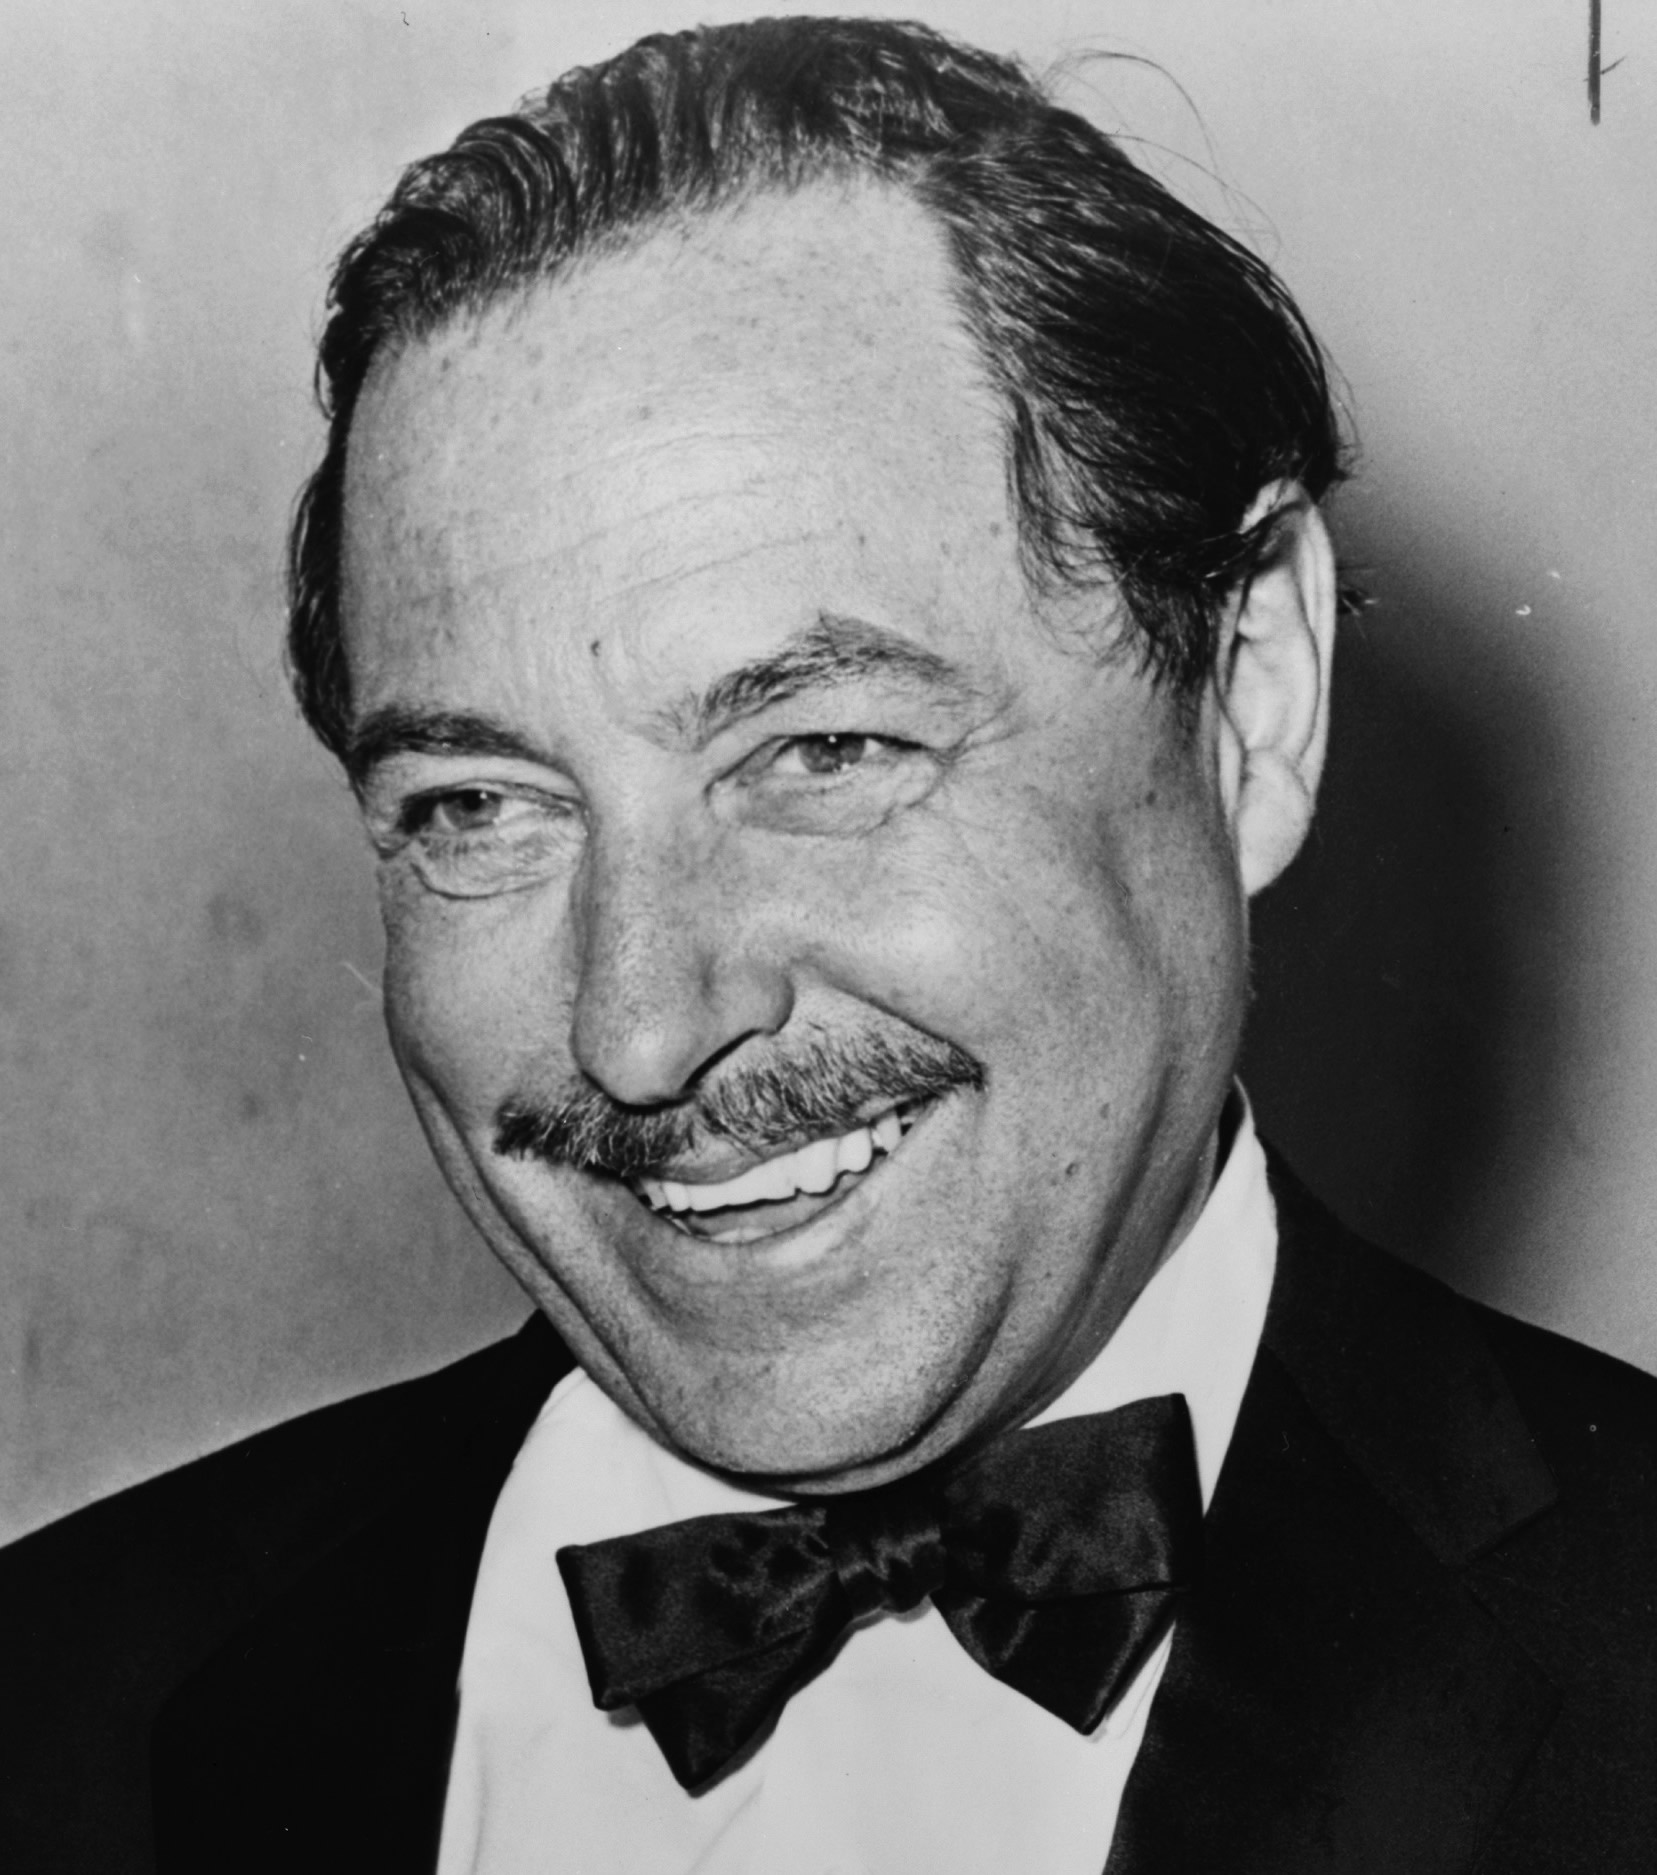 About Tennessee Williams